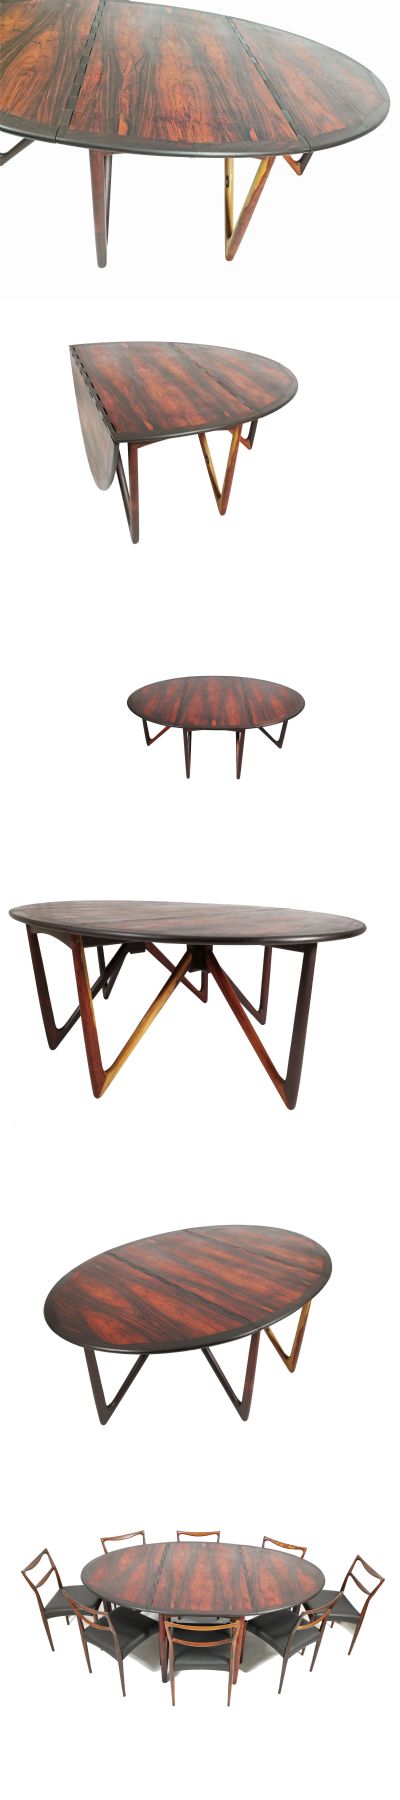 Mid-Century Rosewood Drop Leaf Dining Table by Kurt stervig for Jason Mbler